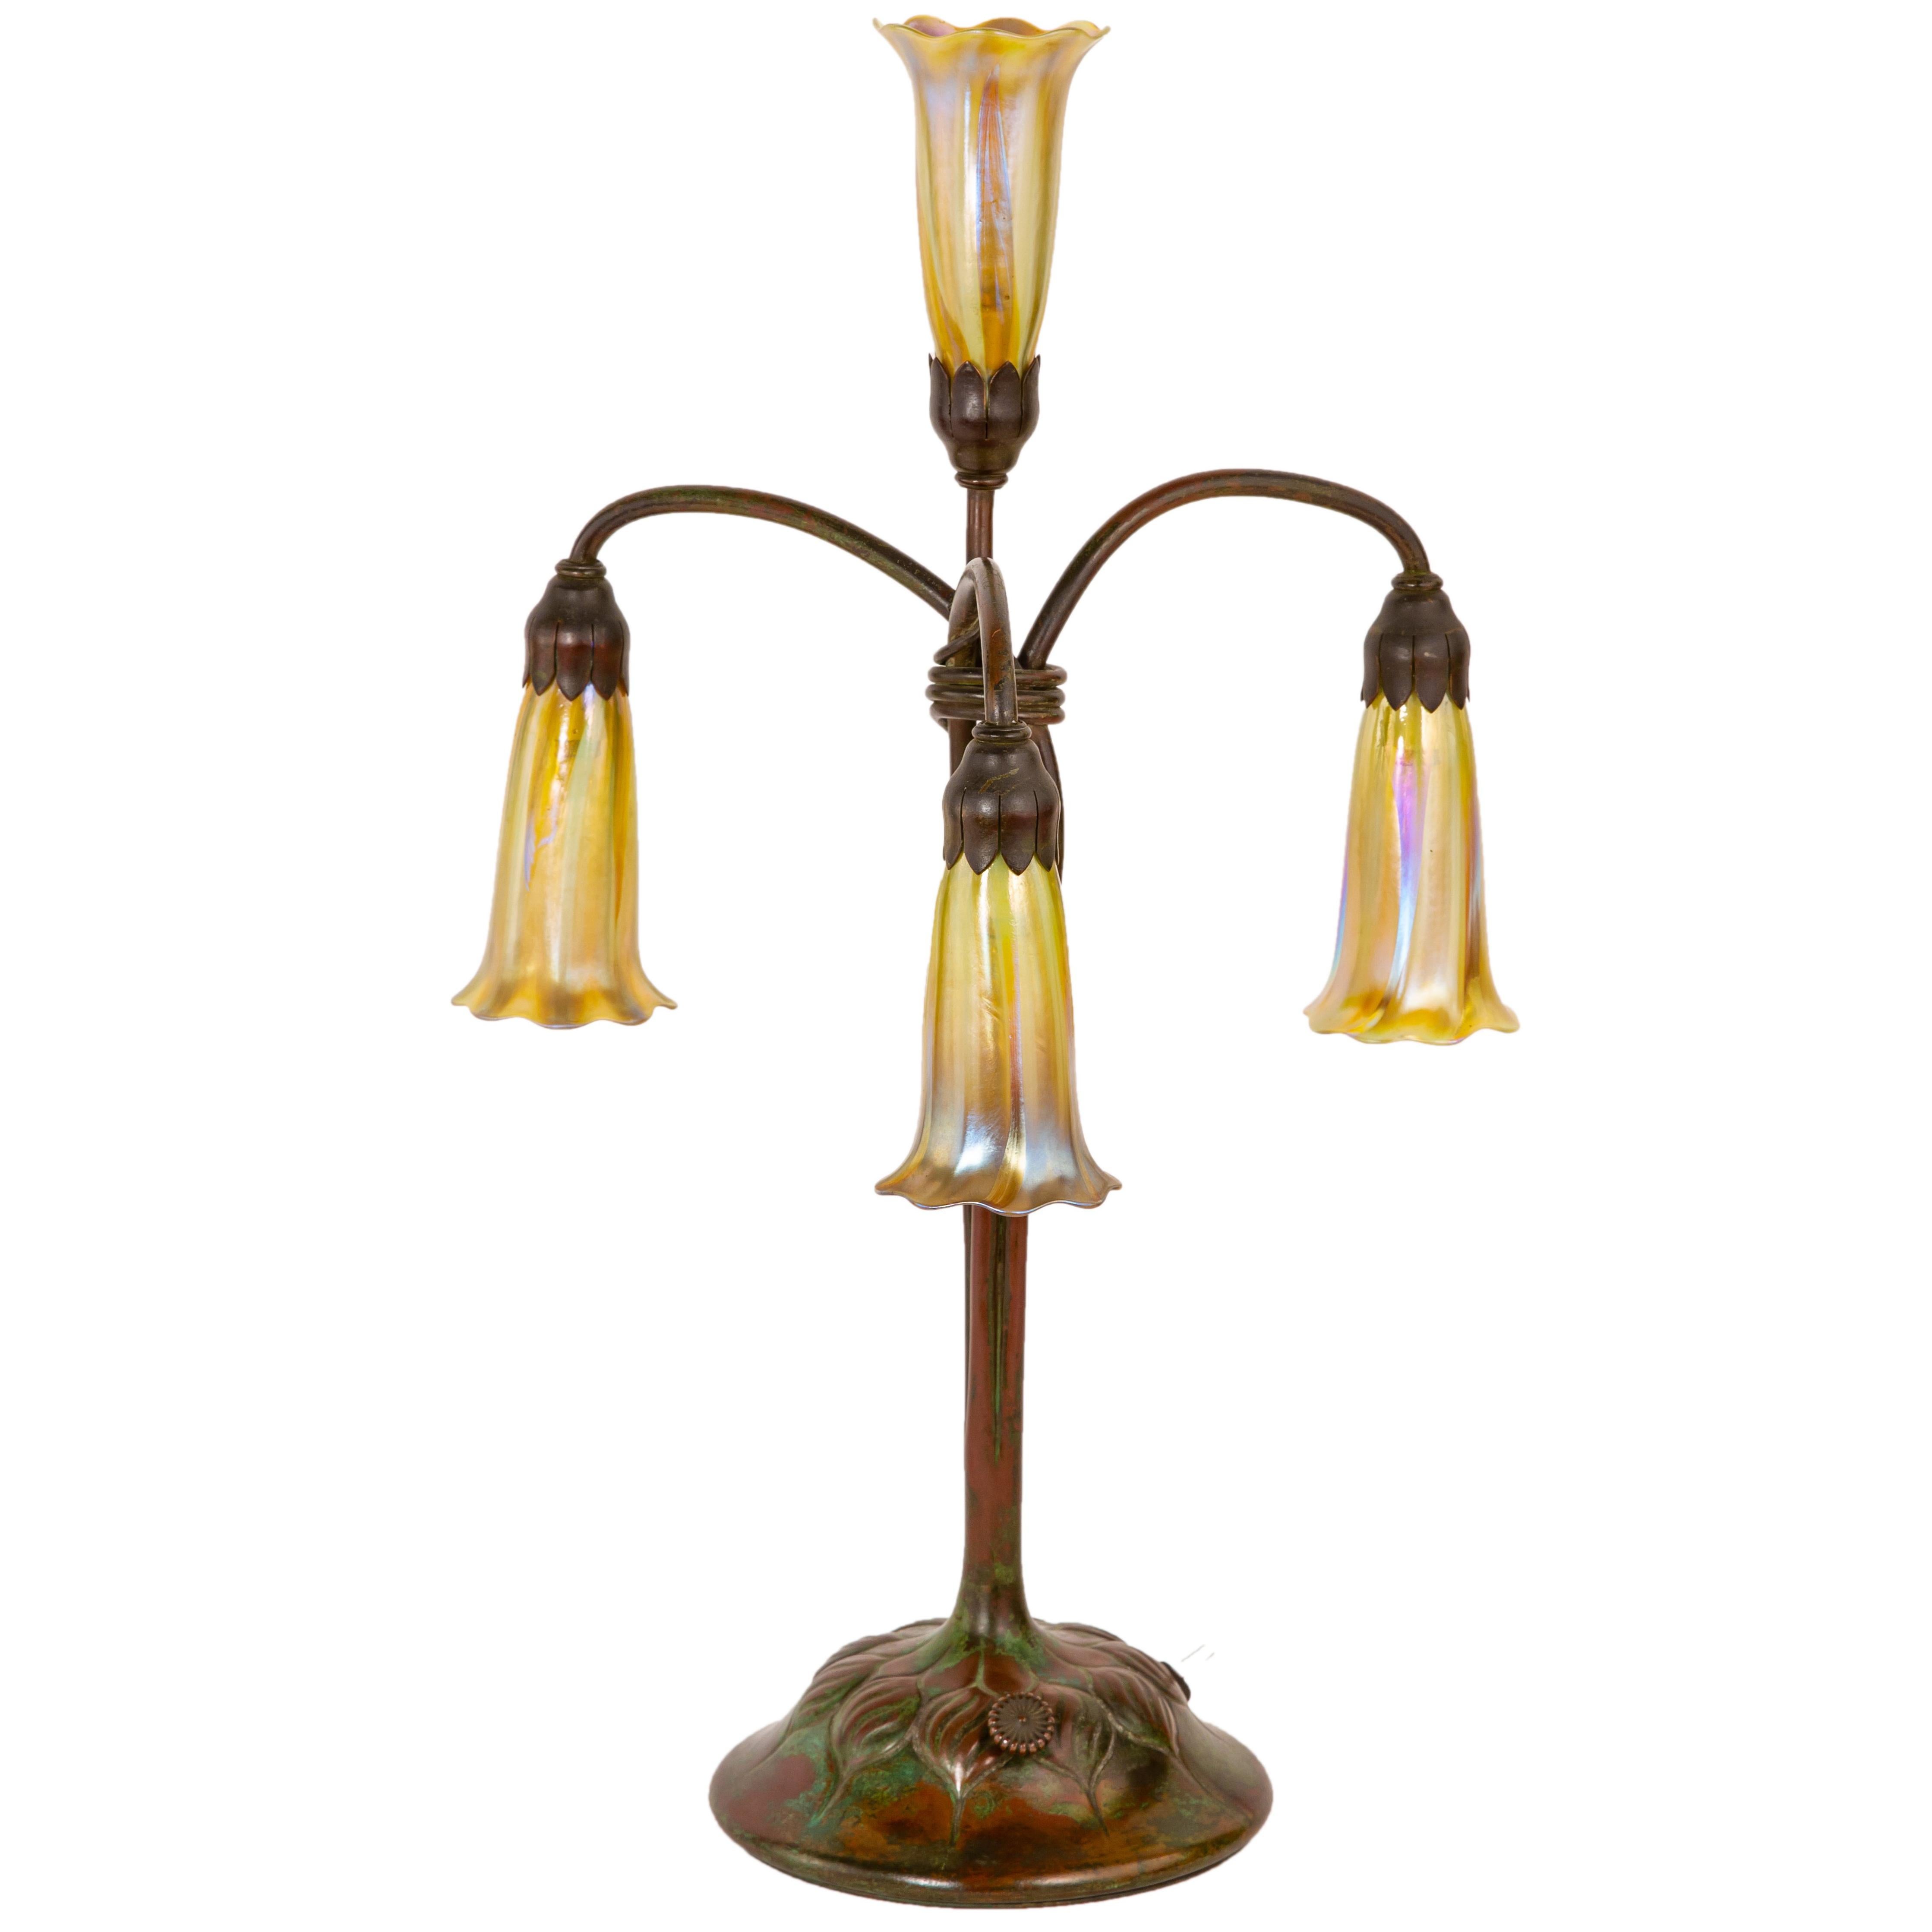 An American Art Nouveau Four-Light Lily Table Lamp by, Tiffany Studios 